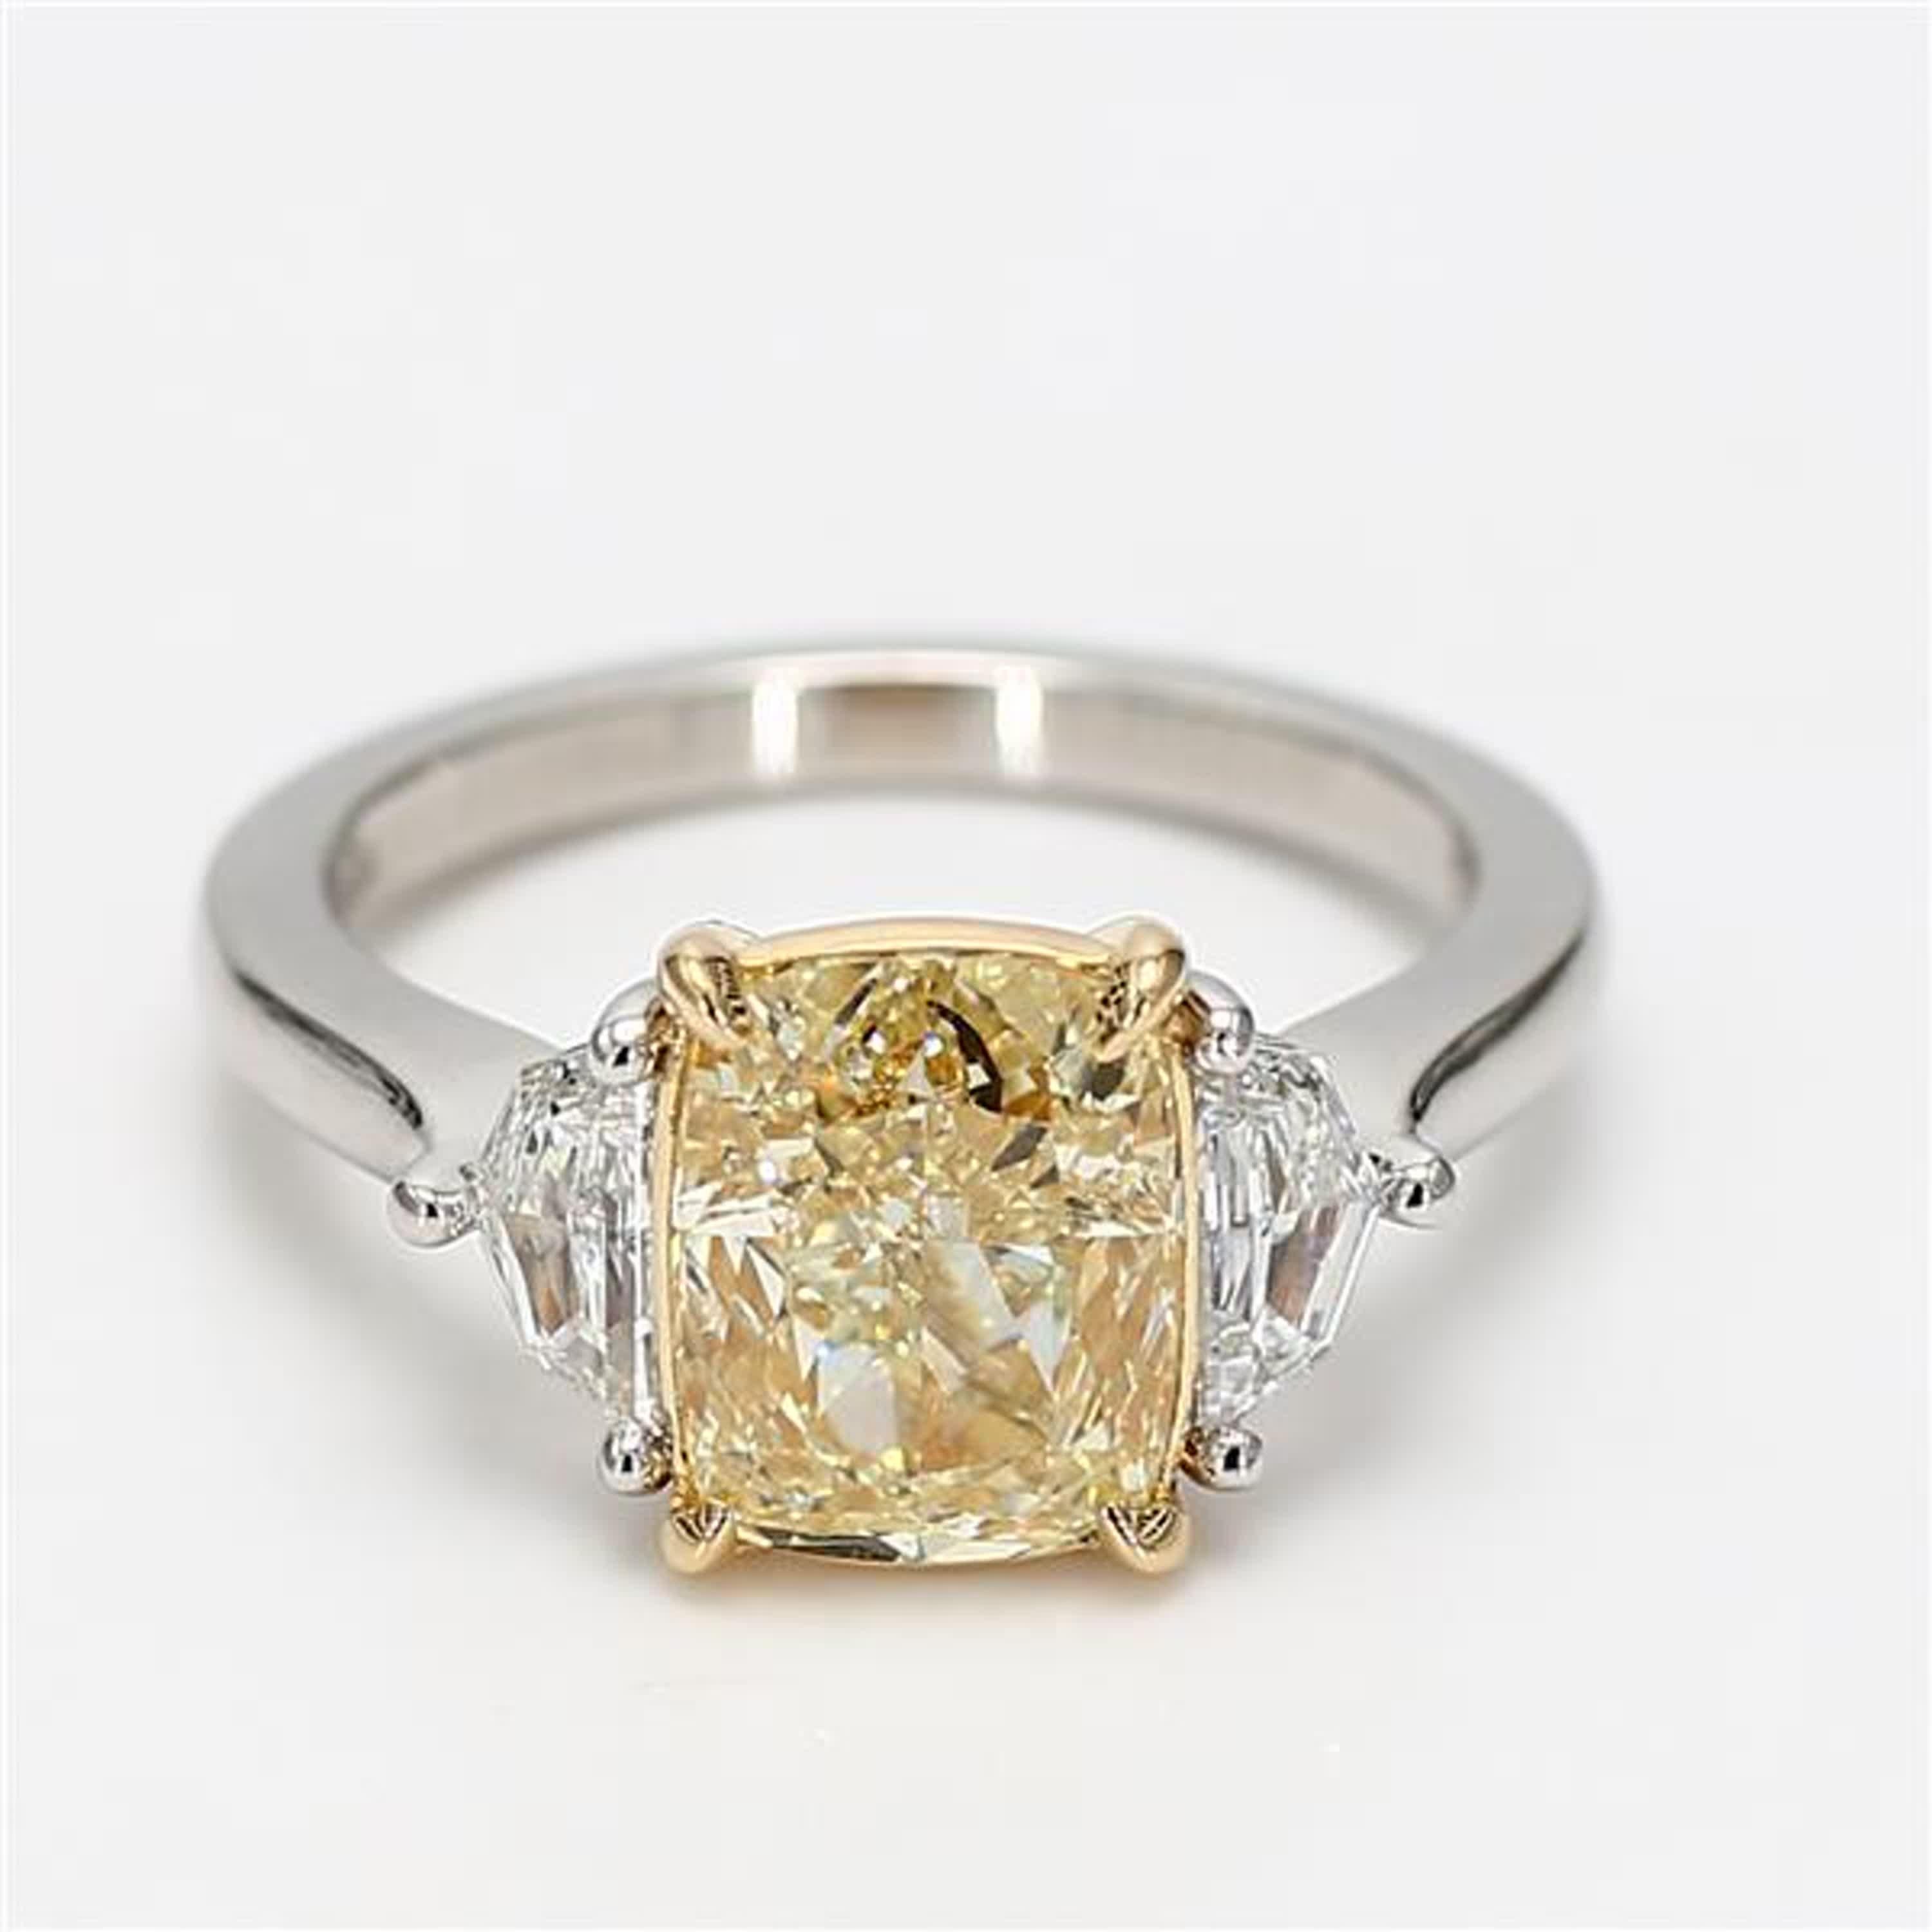 RareGemWorld's classic GIA certified diamond ring. Mounted in a beautiful Platinum and 18K Gold setting with a natural cushion cut yellow diamond. The yellow diamond is surrounded by natural epaulette cut white diamonds. This ring is guaranteed to